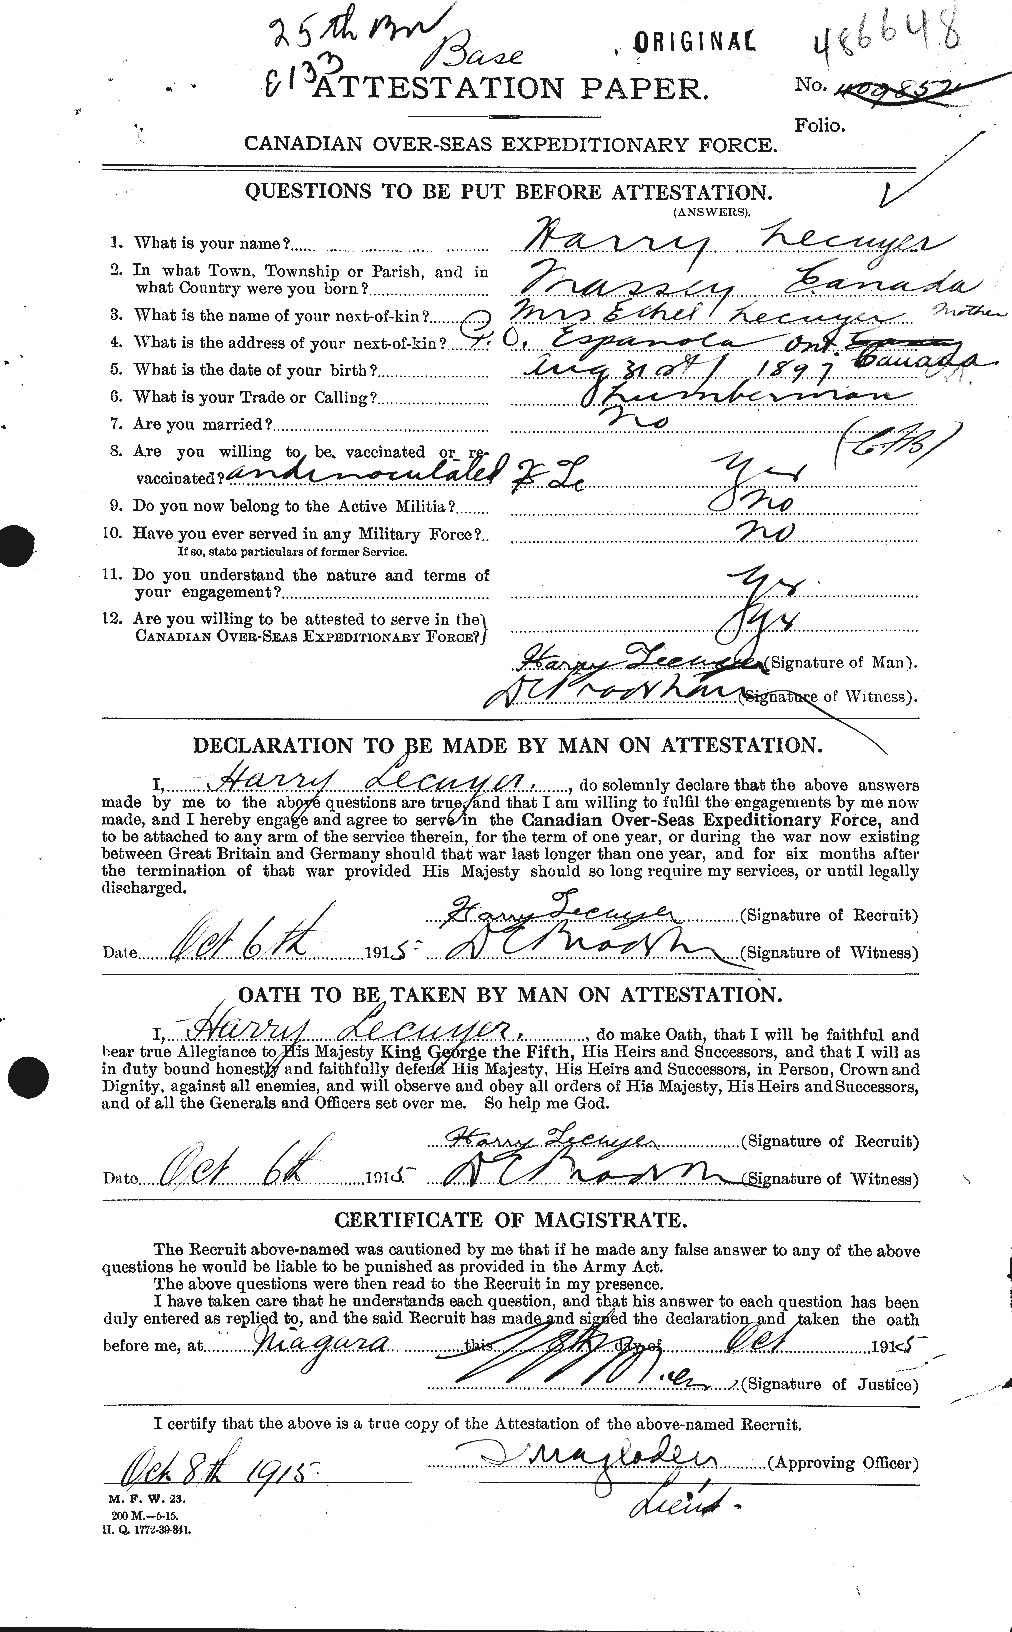 Personnel Records of the First World War - CEF 456301a